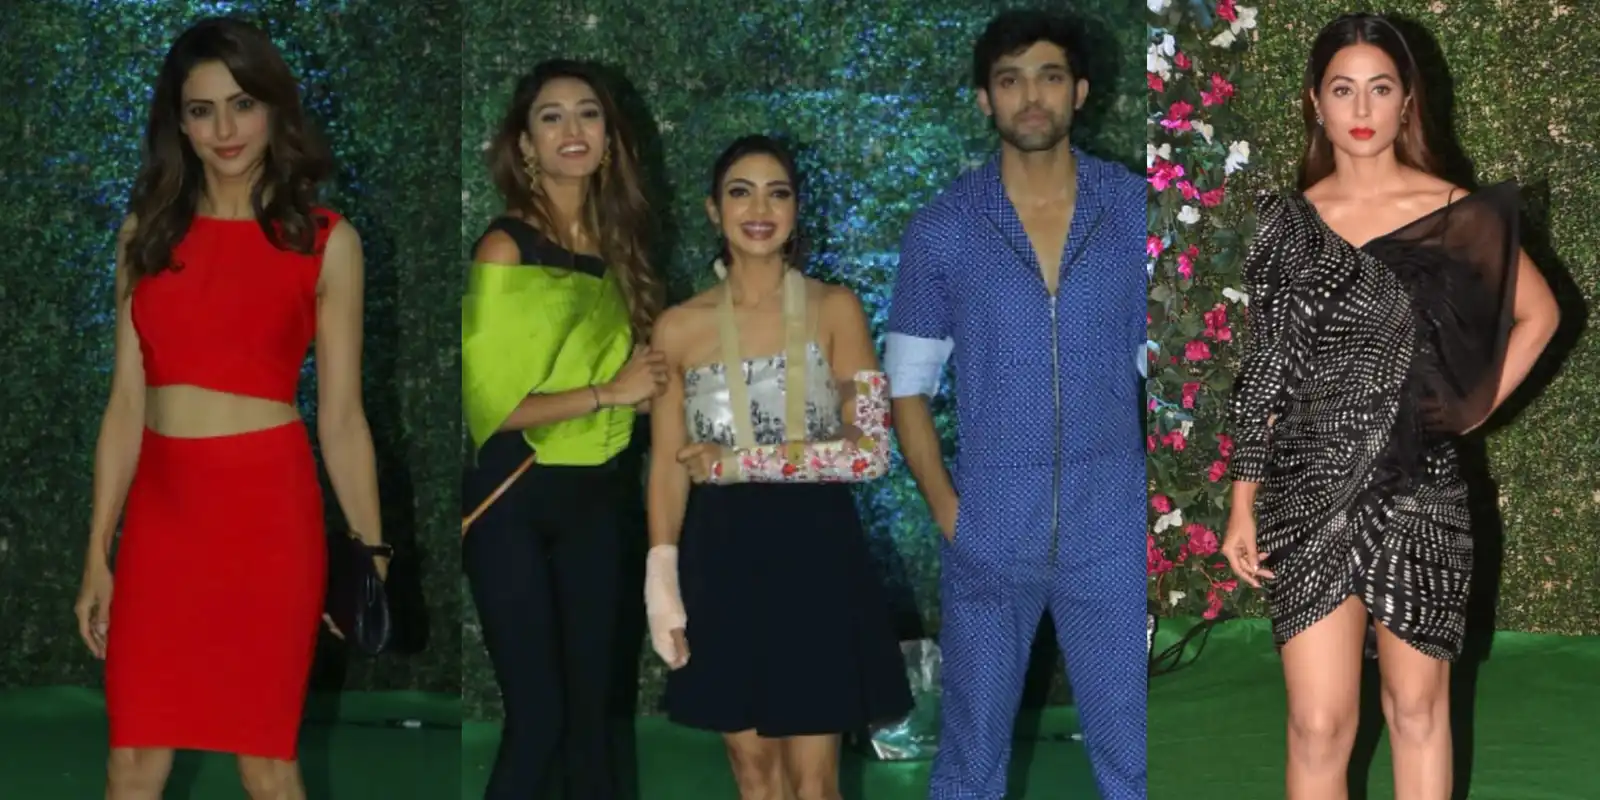 Ekta Kapoor's Party: Erica Fernandez And Parth Samthaan Pose Together, Aamna And Hina Make Heads Turn!